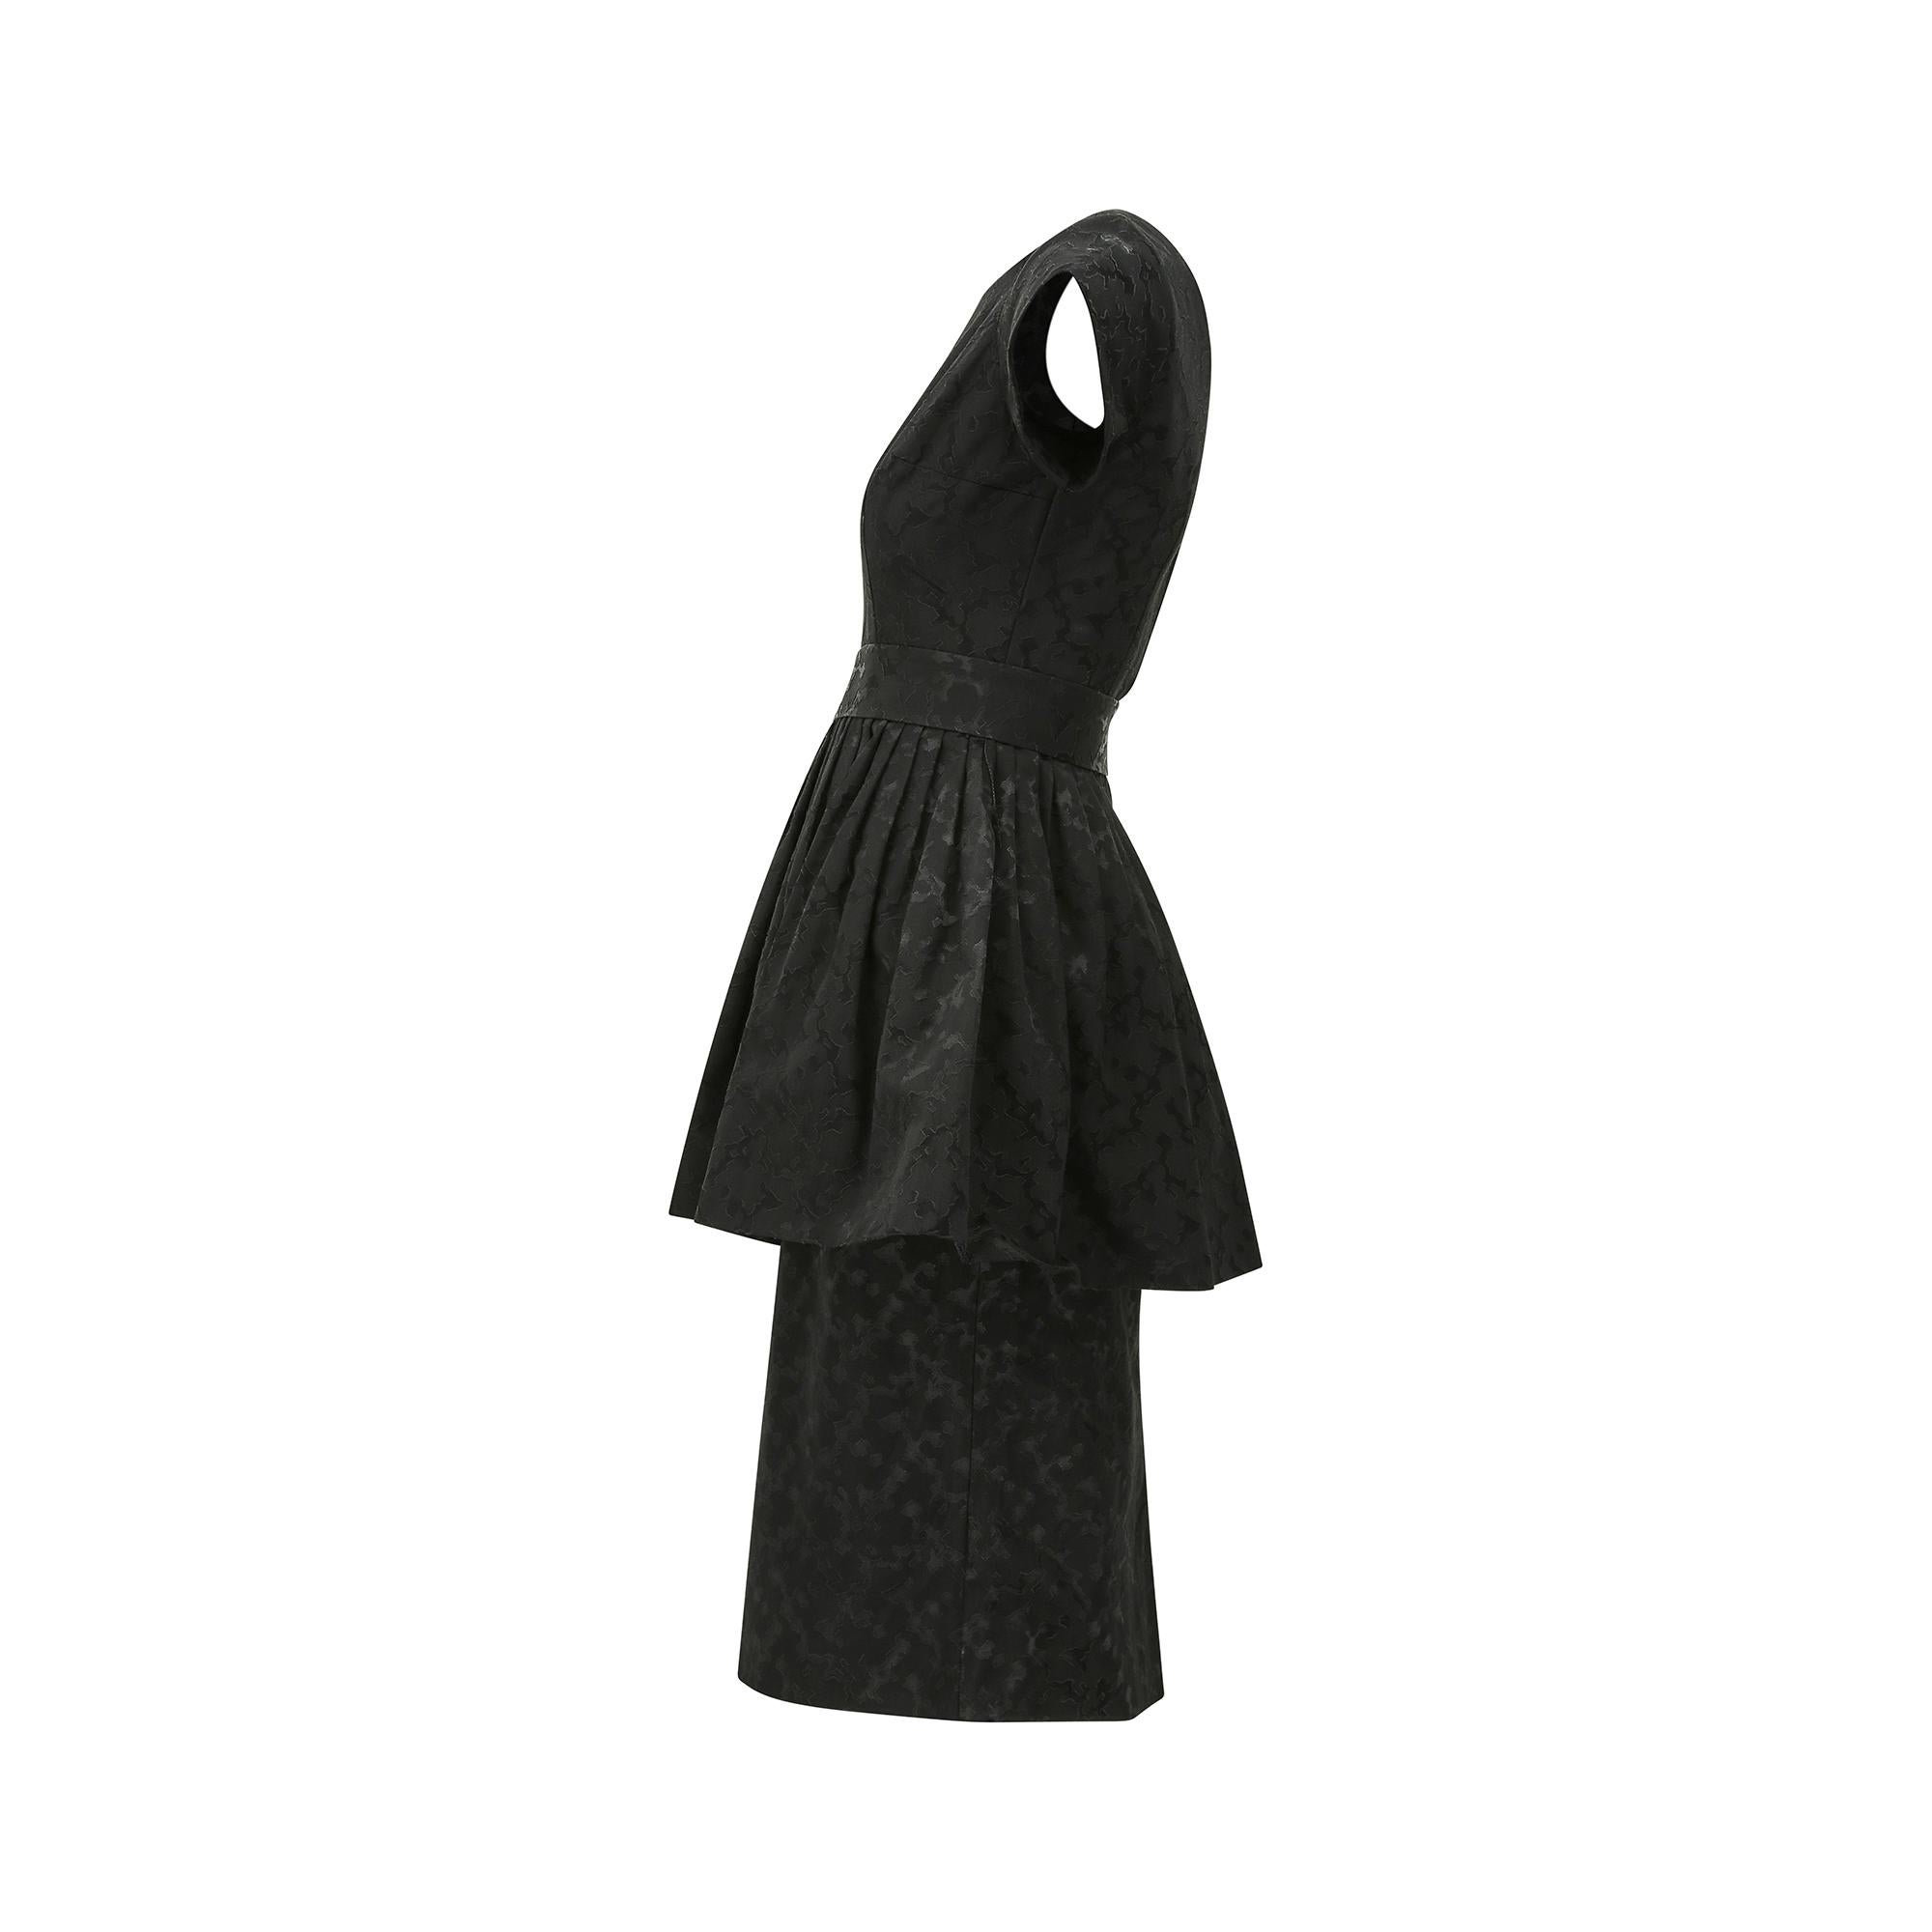 1950s Black Textured Jacquard Dress with Peplum In Excellent Condition For Sale In London, GB